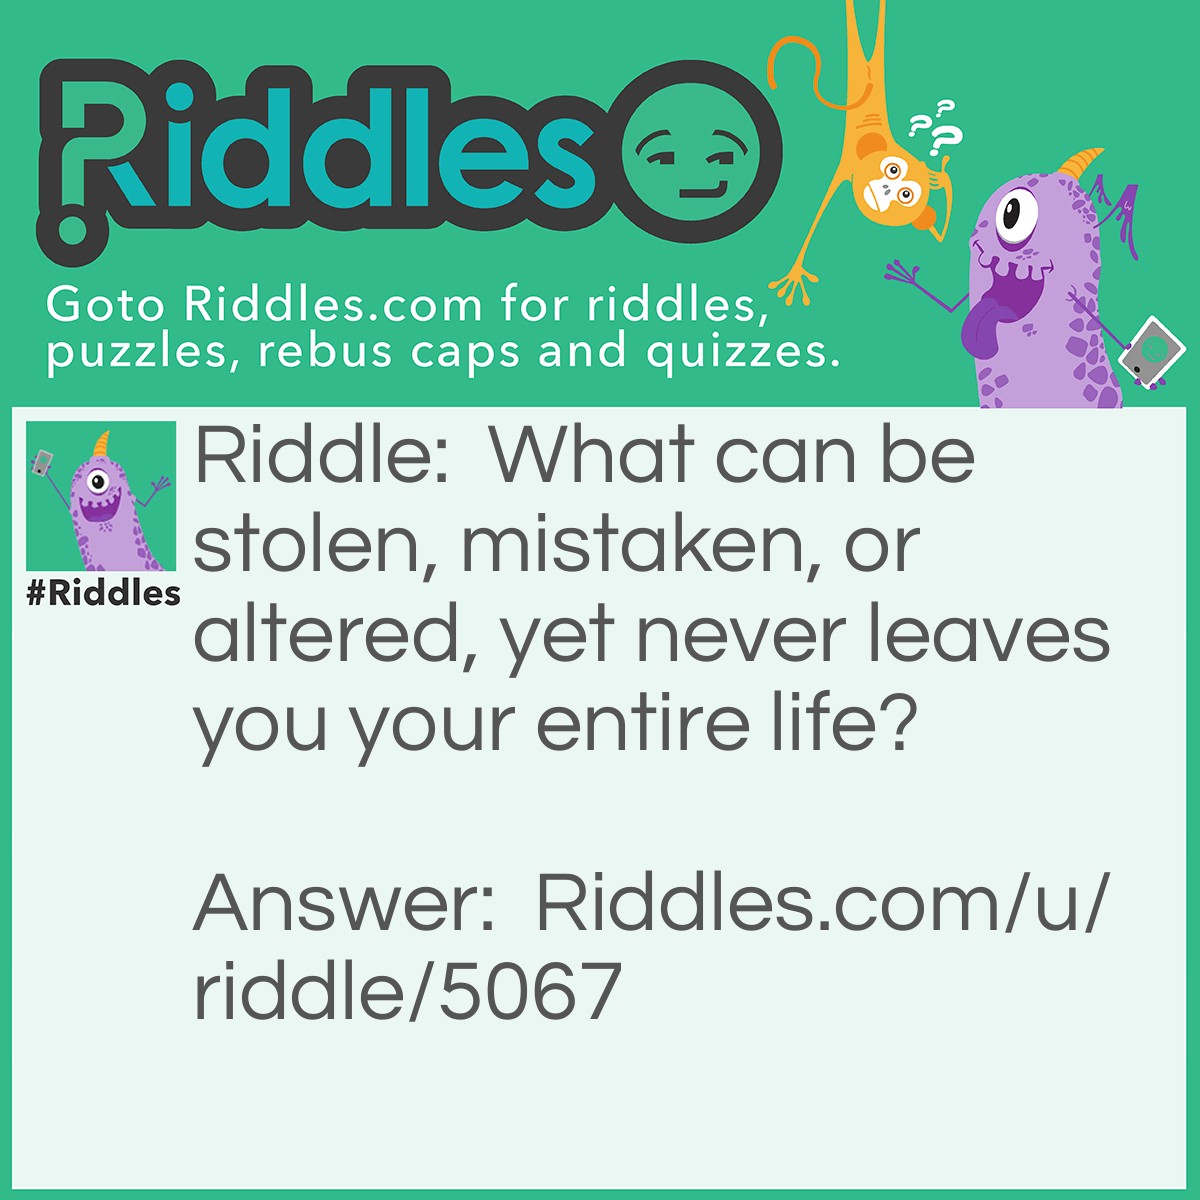 Riddle: What can be stolen, mistaken, or altered, yet never leaves you your entire life? Answer: Your identity.